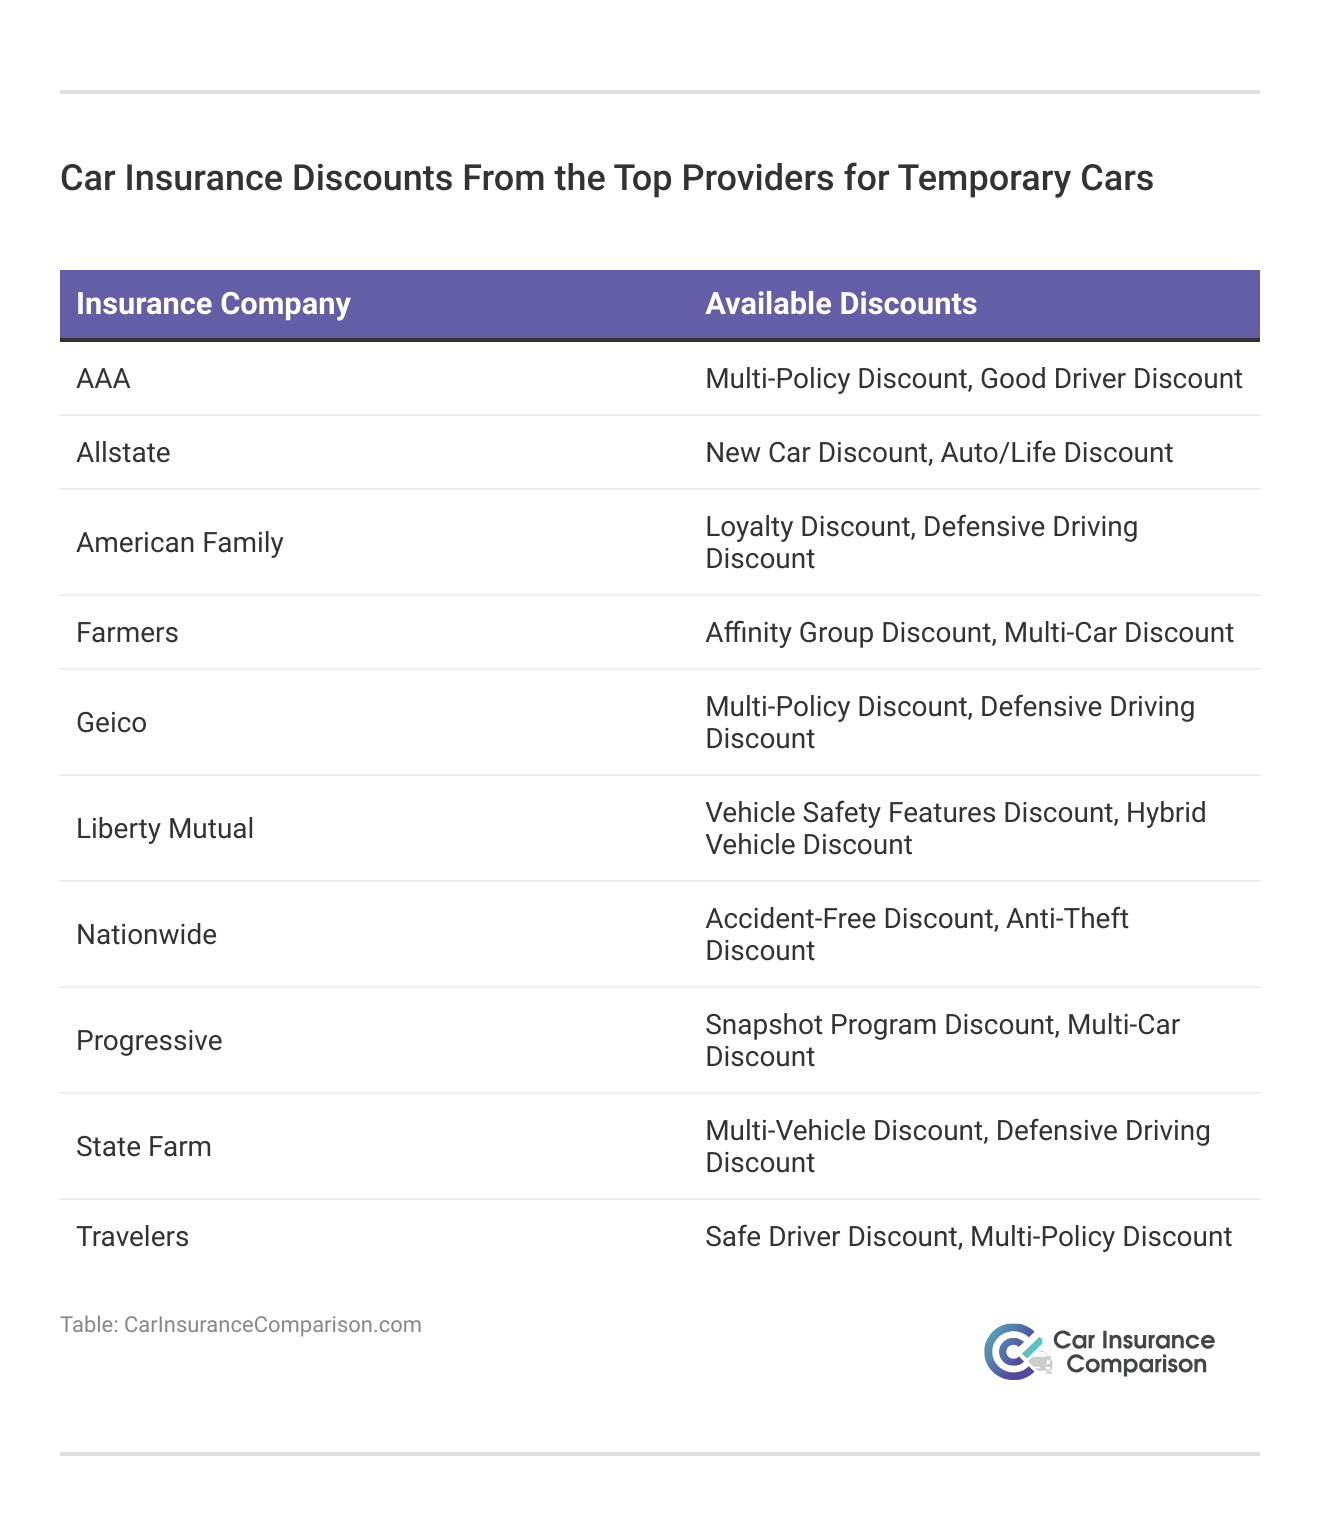 <h3>Car Insurance Discounts From the Top Providers for Temporary Cars</h3> 